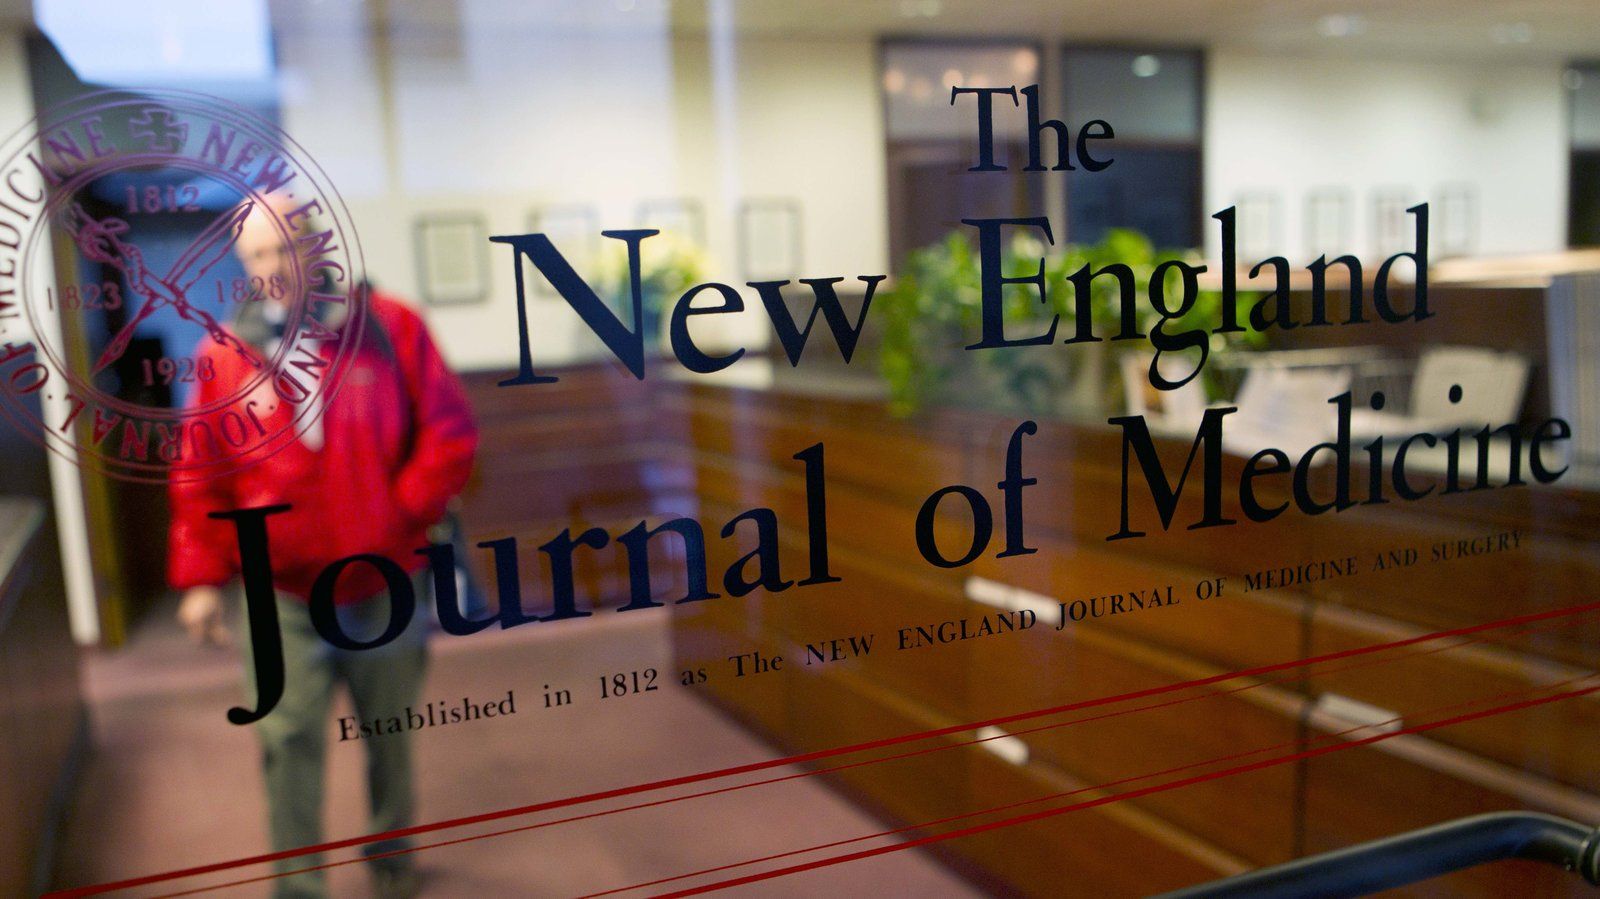 The New England Journal of medicine